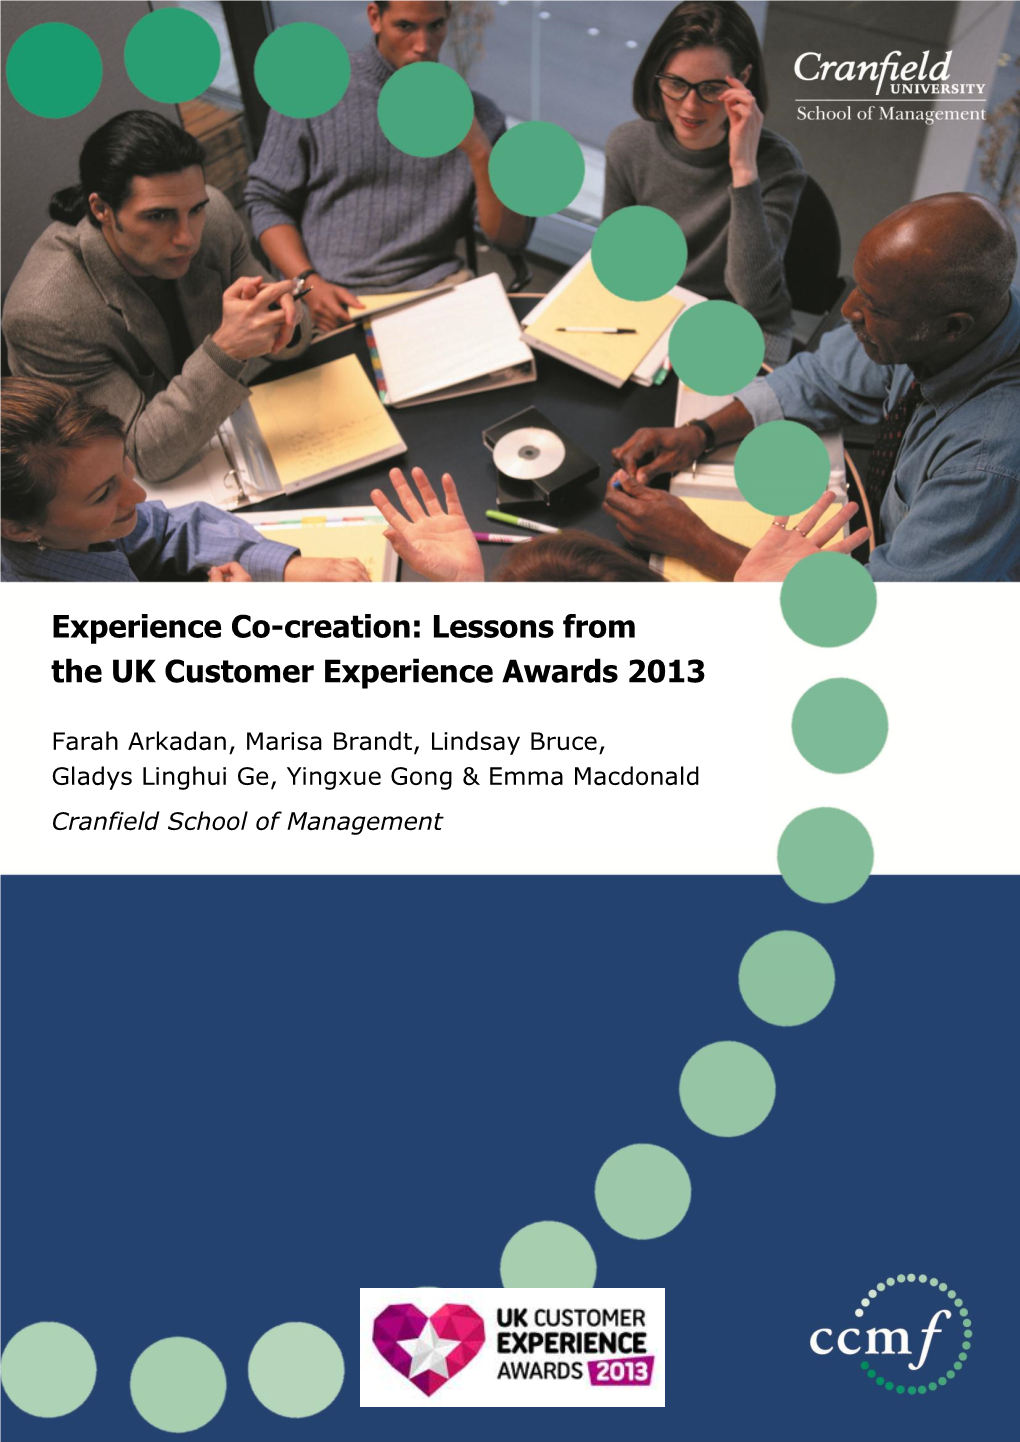 Experience Co-Creation: Lessons from the UK Customer Experience Awards 2013